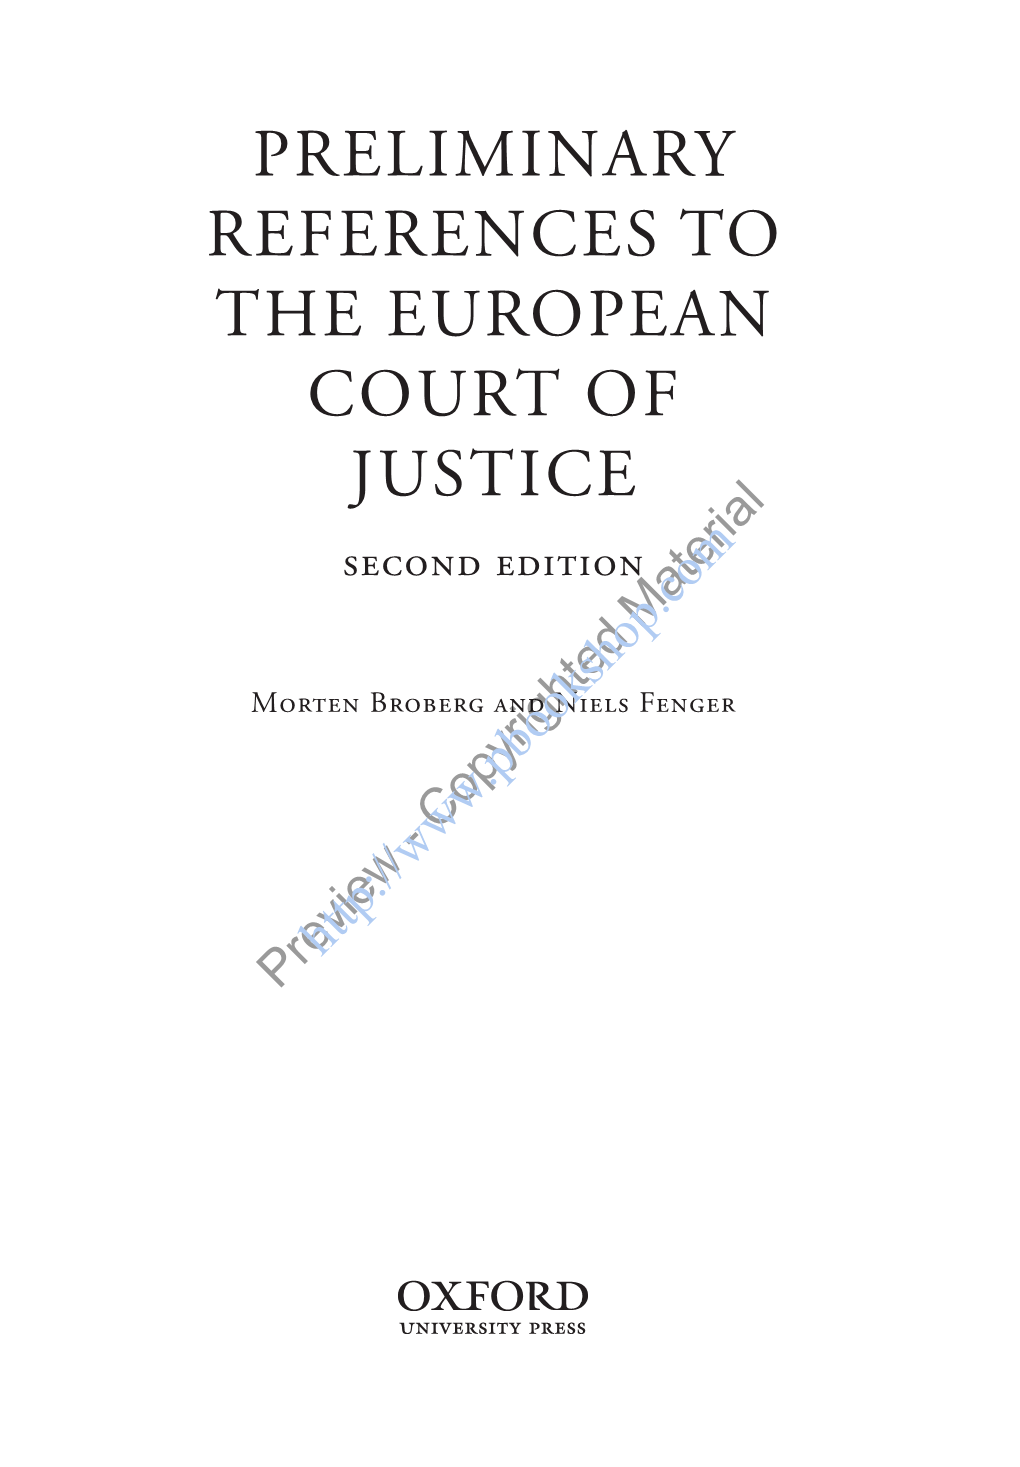 PRELIMINARY REFERENCES to the EUROPEAN COURT of JUSTICE Second Edition